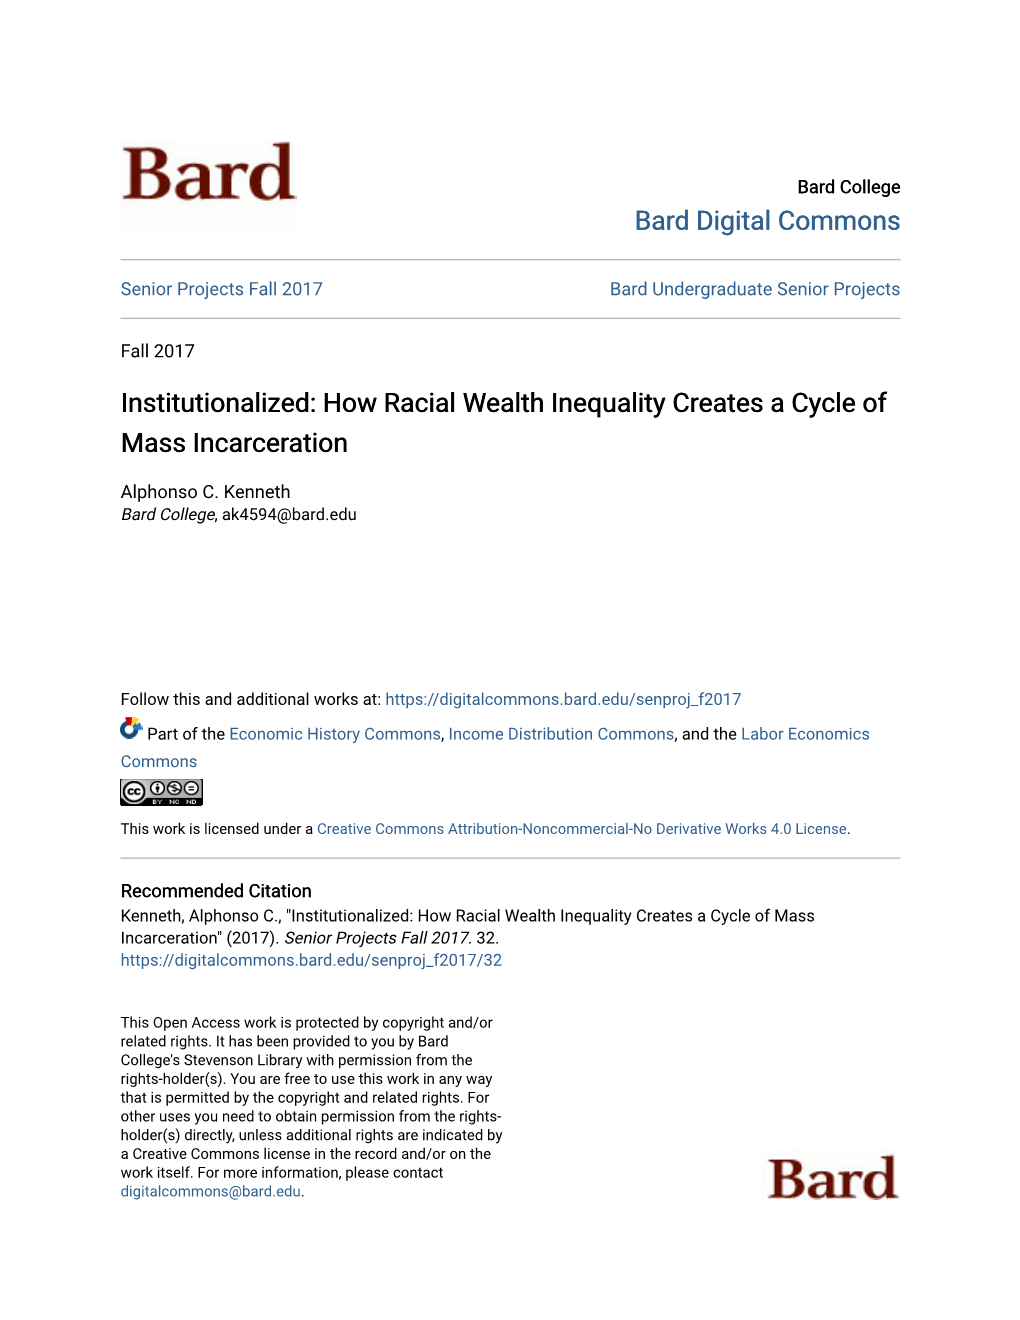 How Racial Wealth Inequality Creates a Cycle of Mass Incarceration